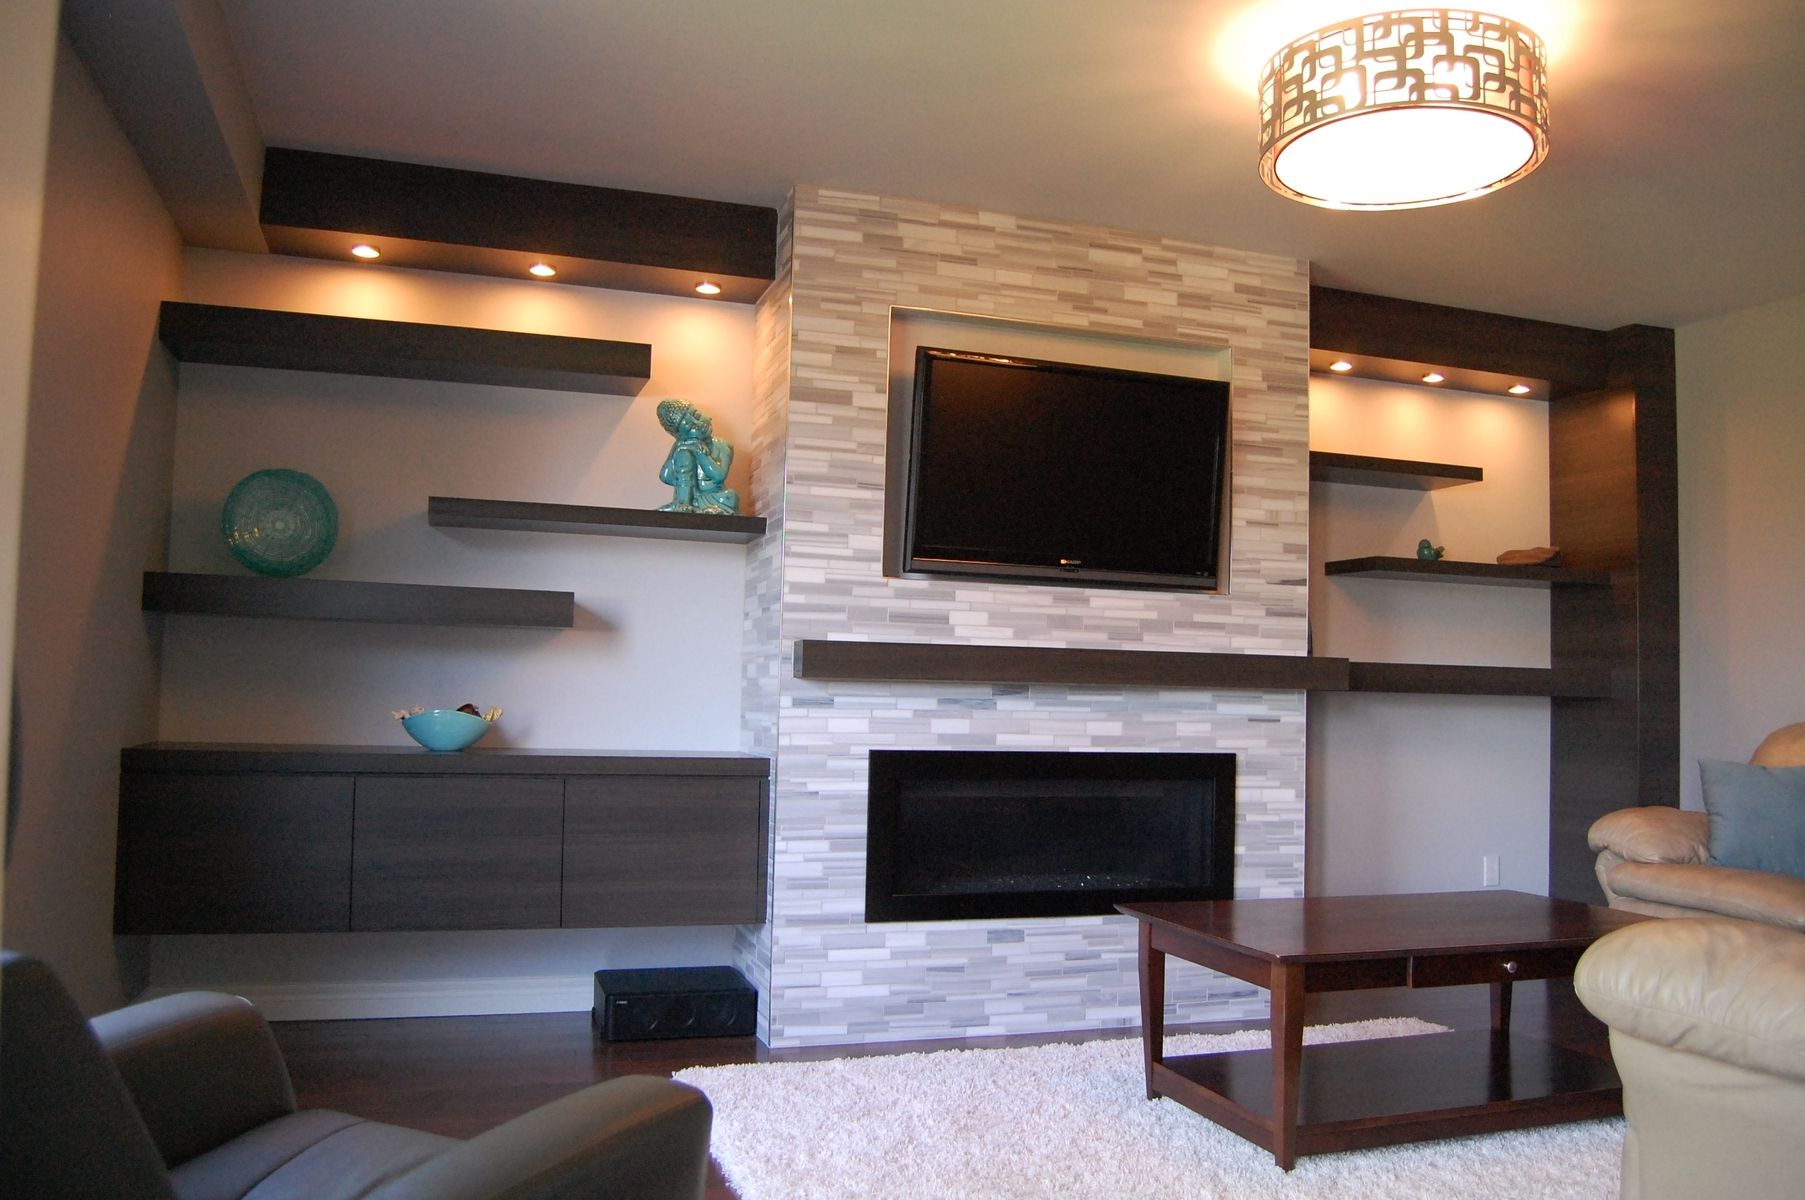 65 Inch Tv Over Fireplace Luxury Custom Modern Wall Unit Made Pletely From A Printed